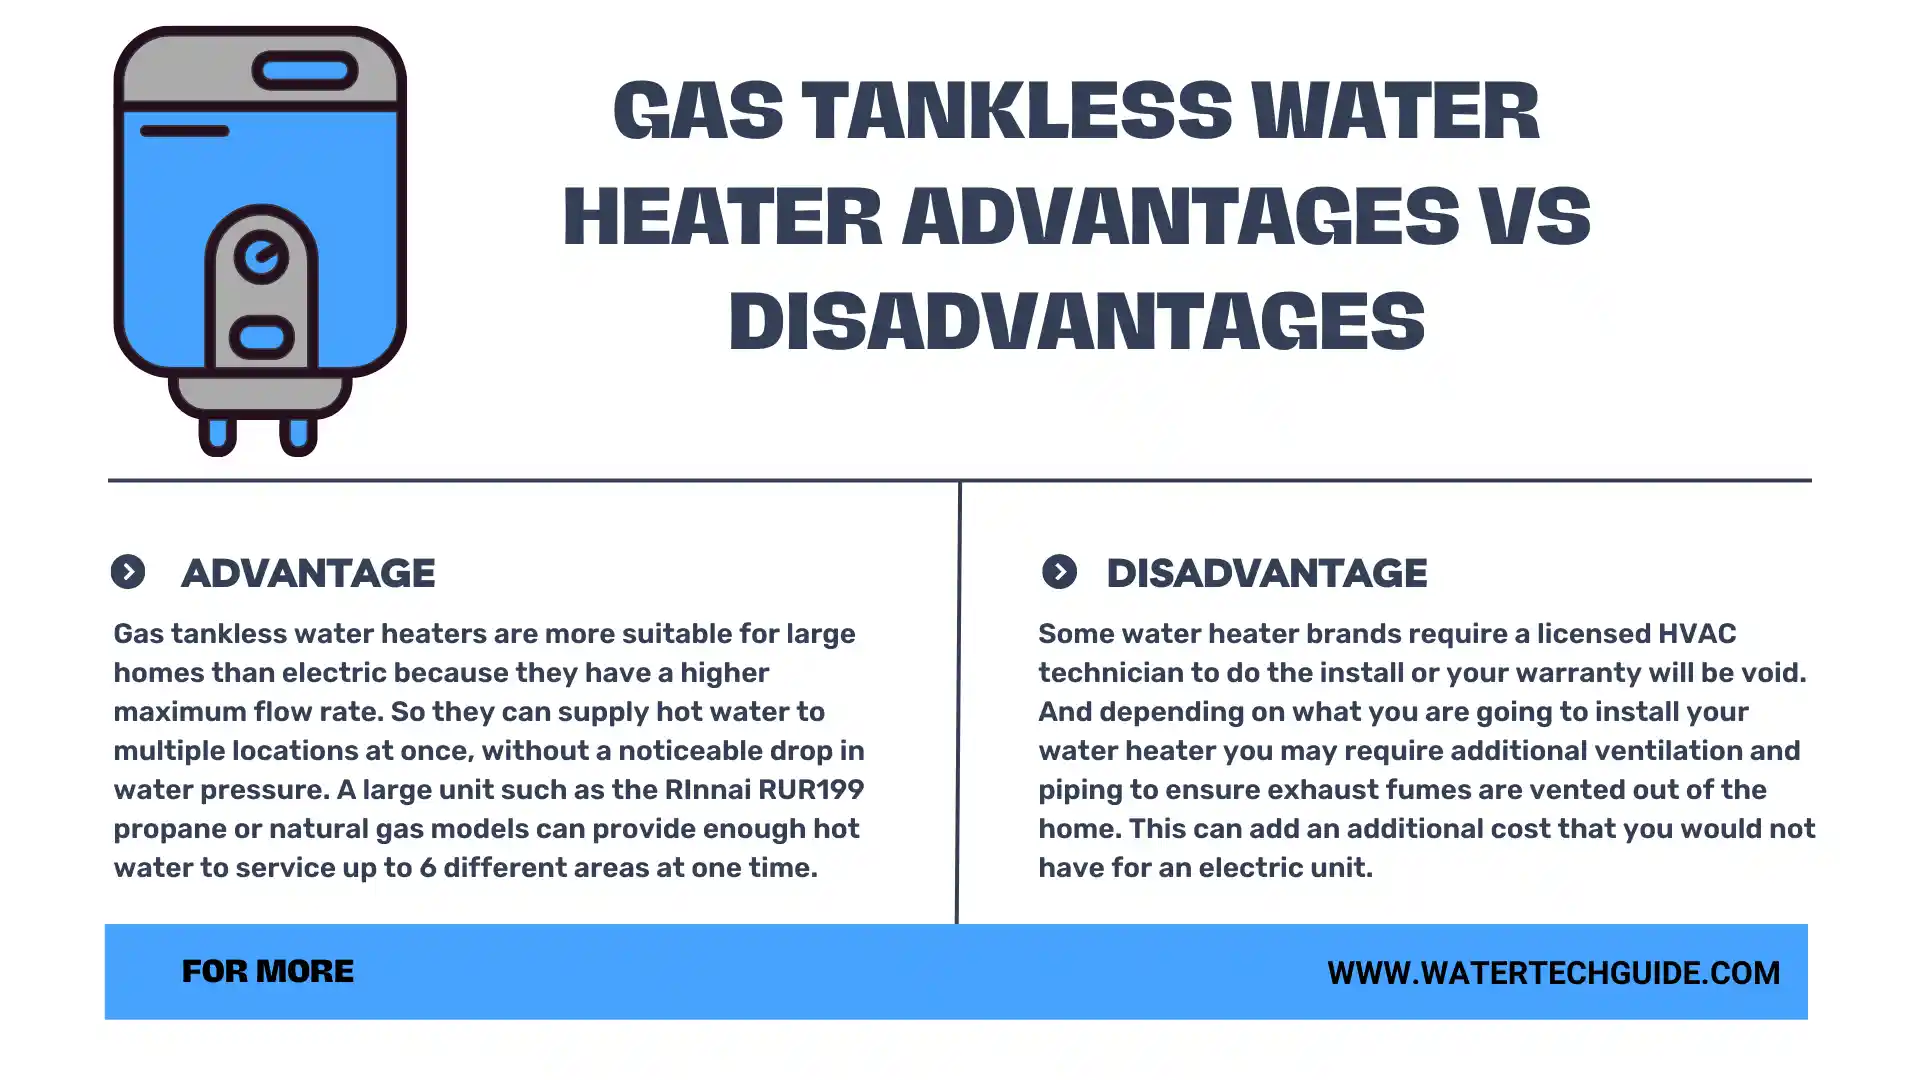 Gas Tankless Water Heater Advantages vs Disadvantages